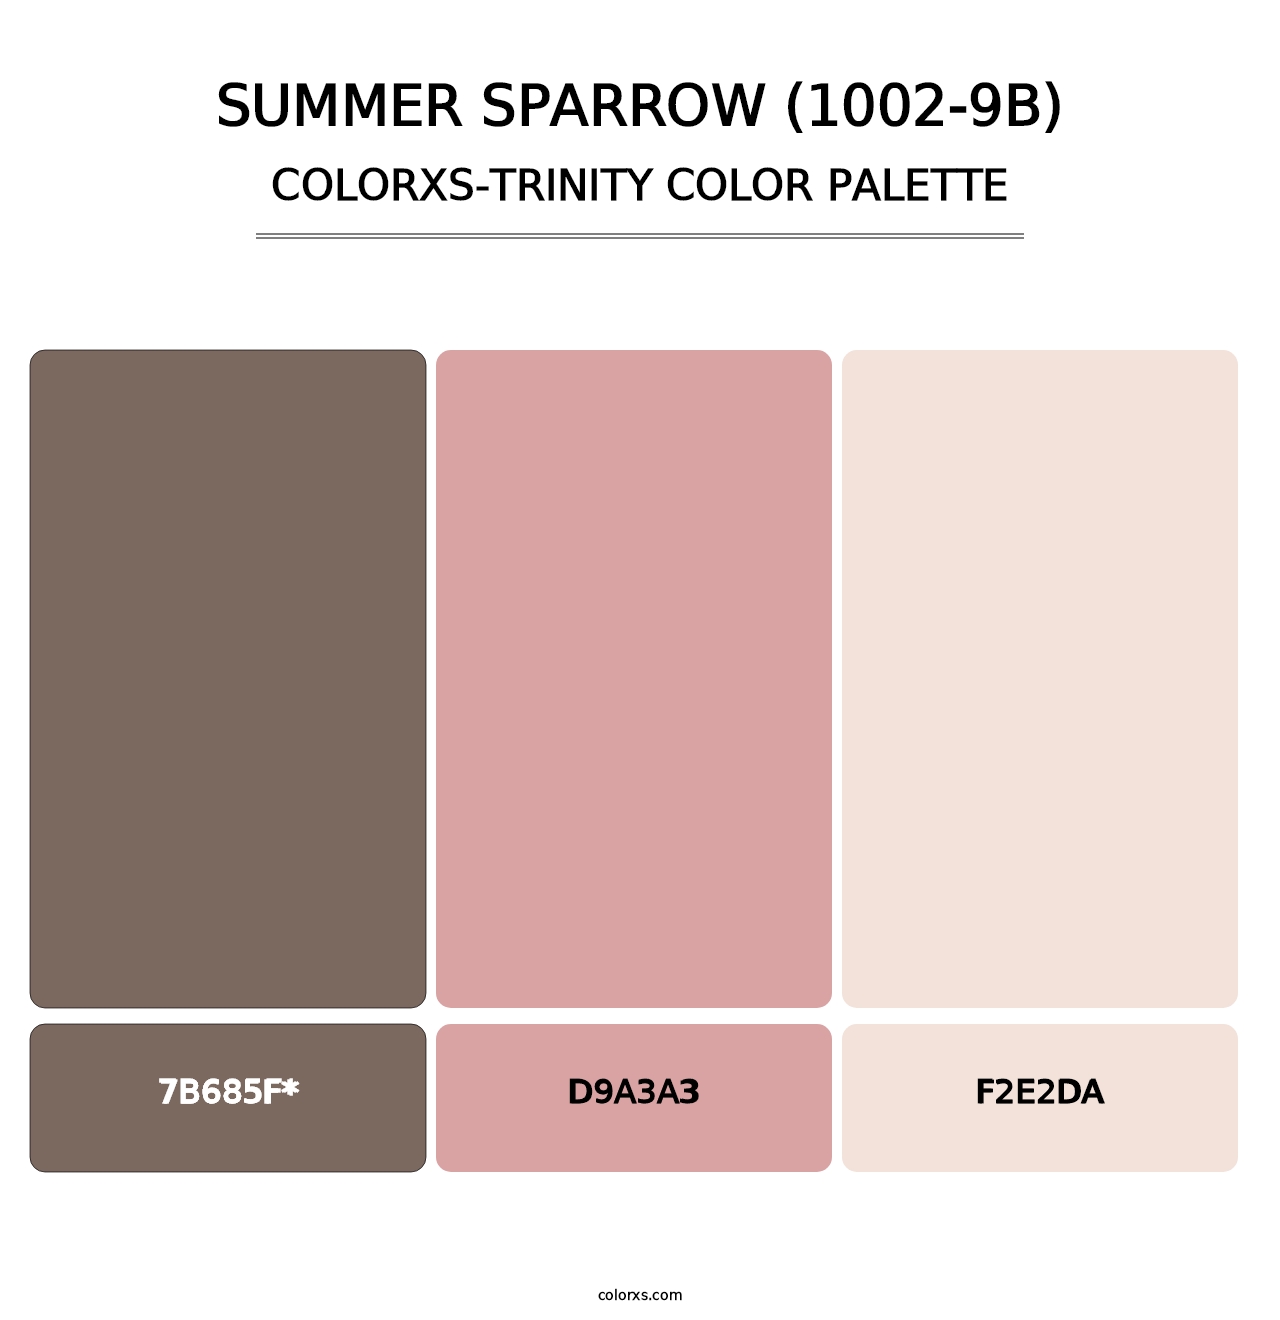 Summer Sparrow (1002-9B) - Colorxs Trinity Palette